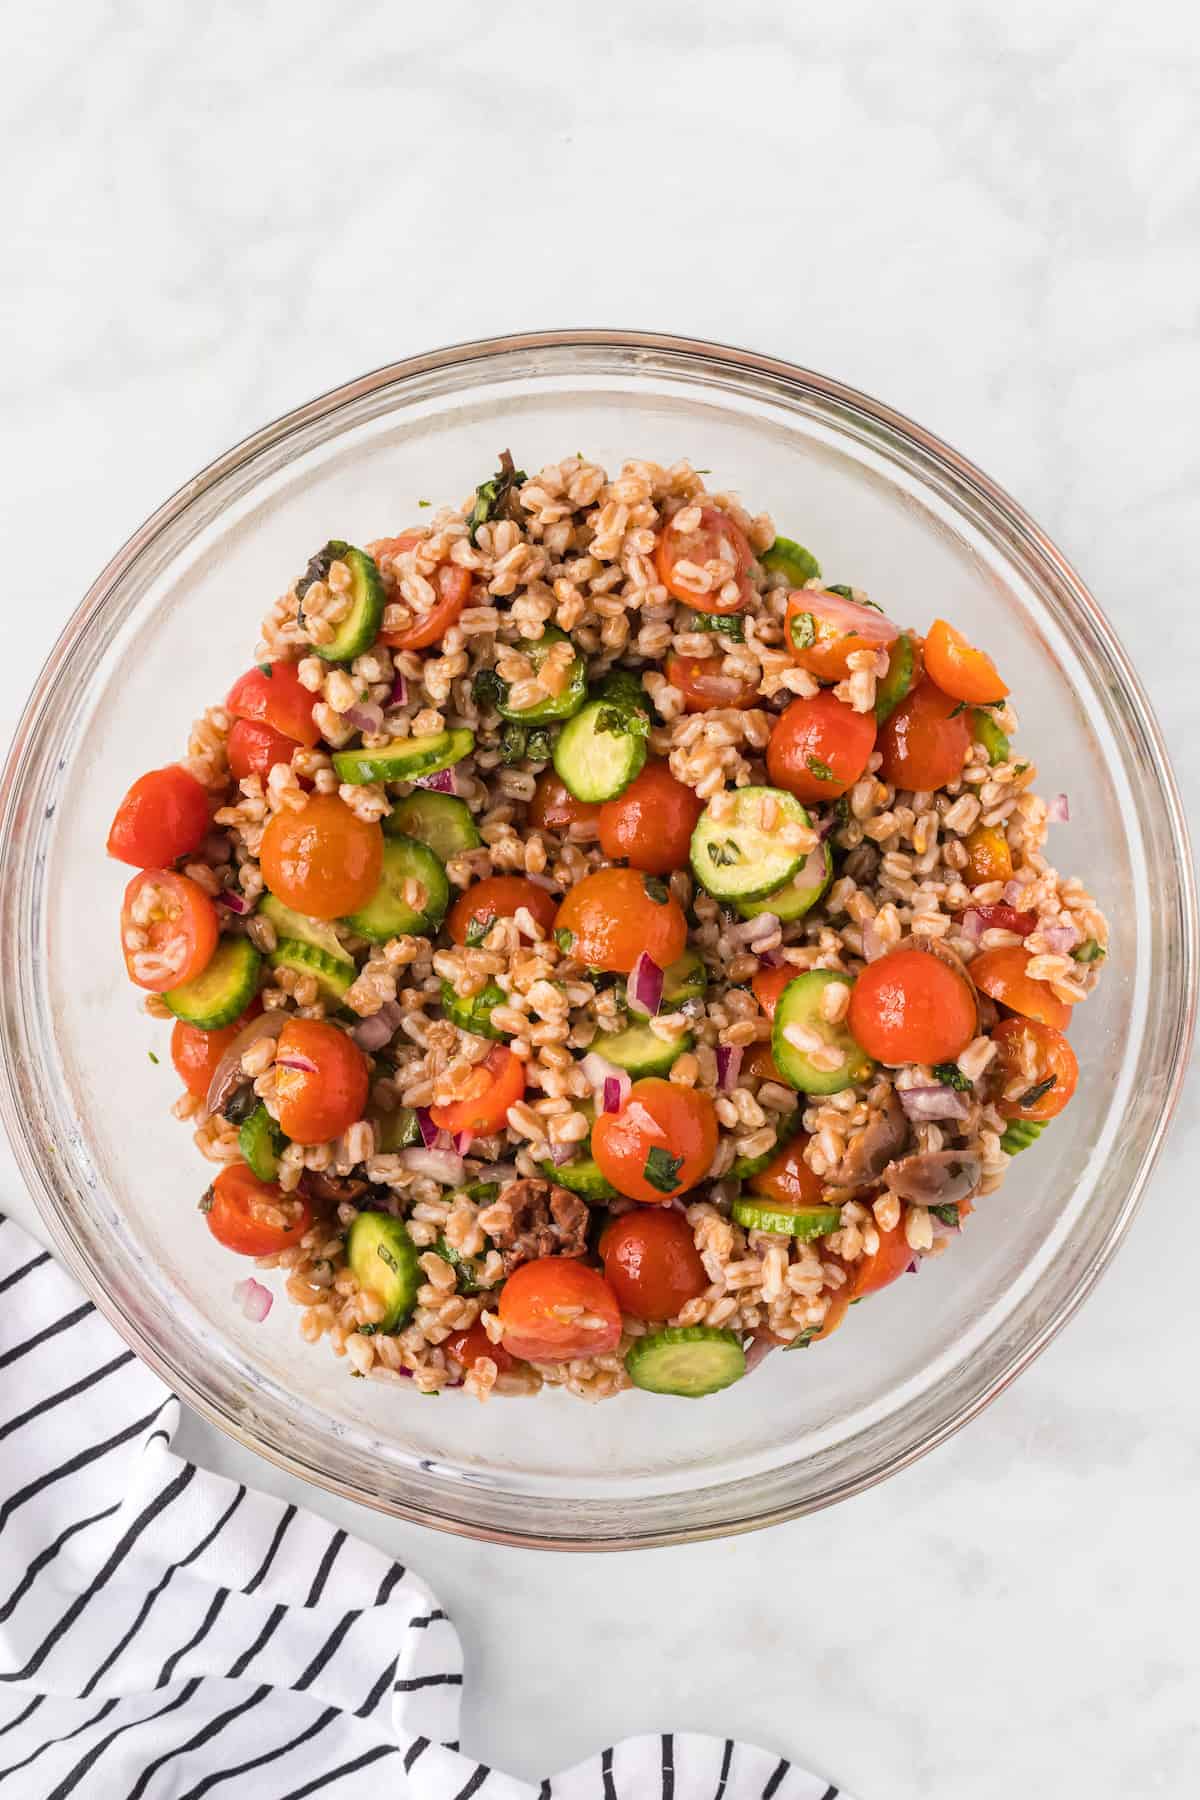 all of the vegetables combined with the cooked farro in a large bowl.